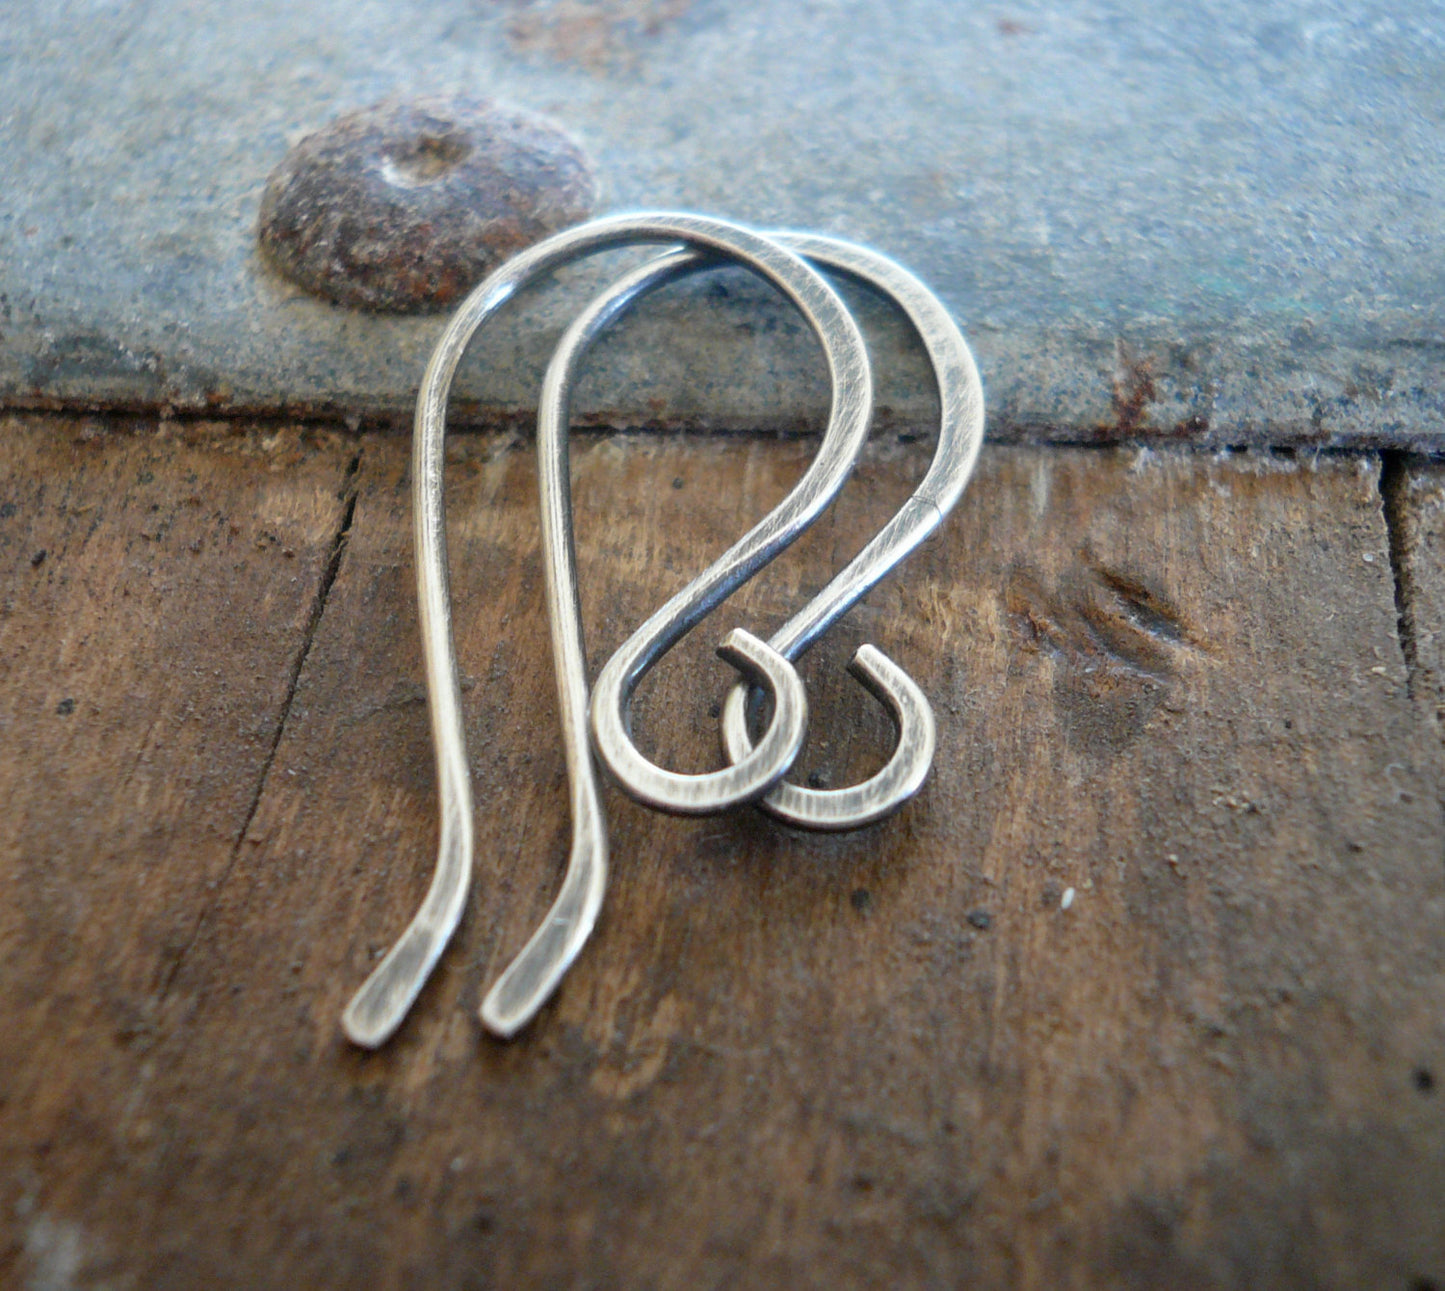 12 Pairs of my Dandy Sterling Silver Earwires - Handmade. Handforged. Oxidized and polished. Made to Order